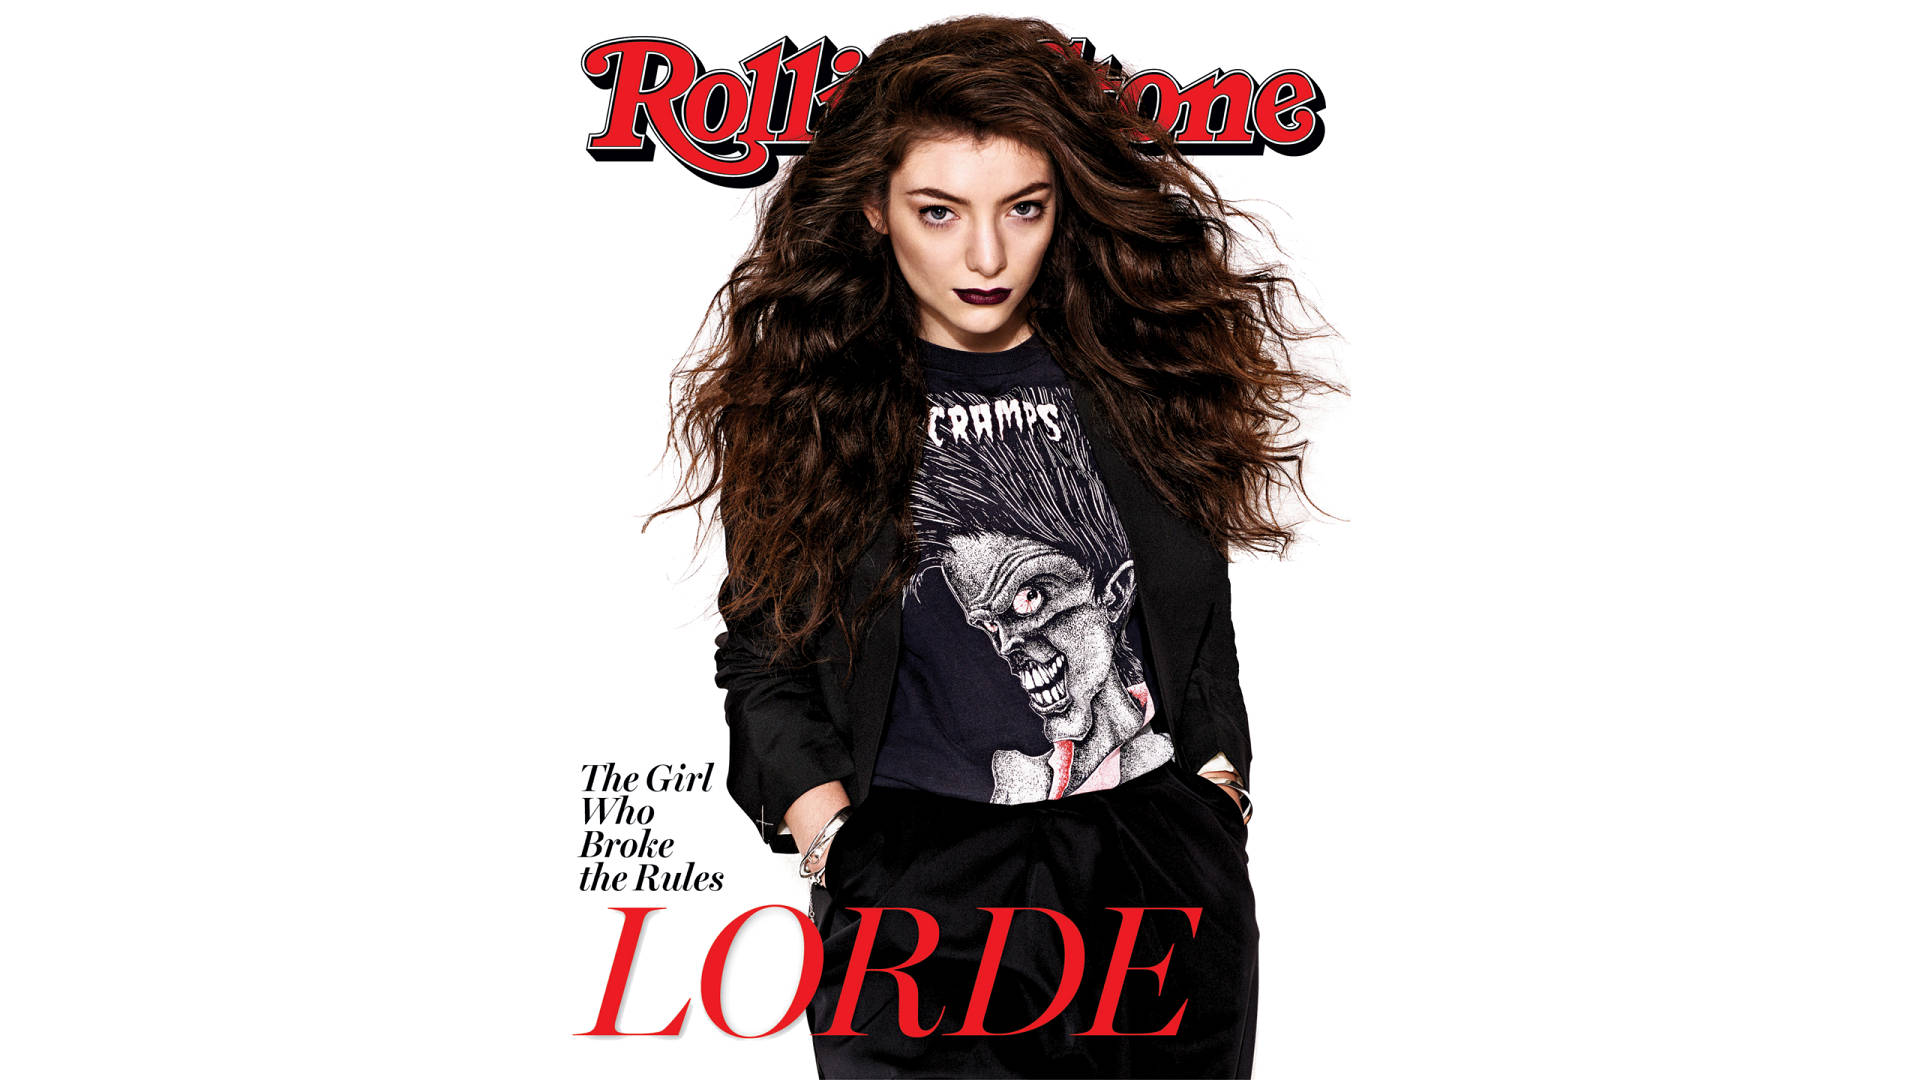 Lorde In Rolling Stone Cover Background